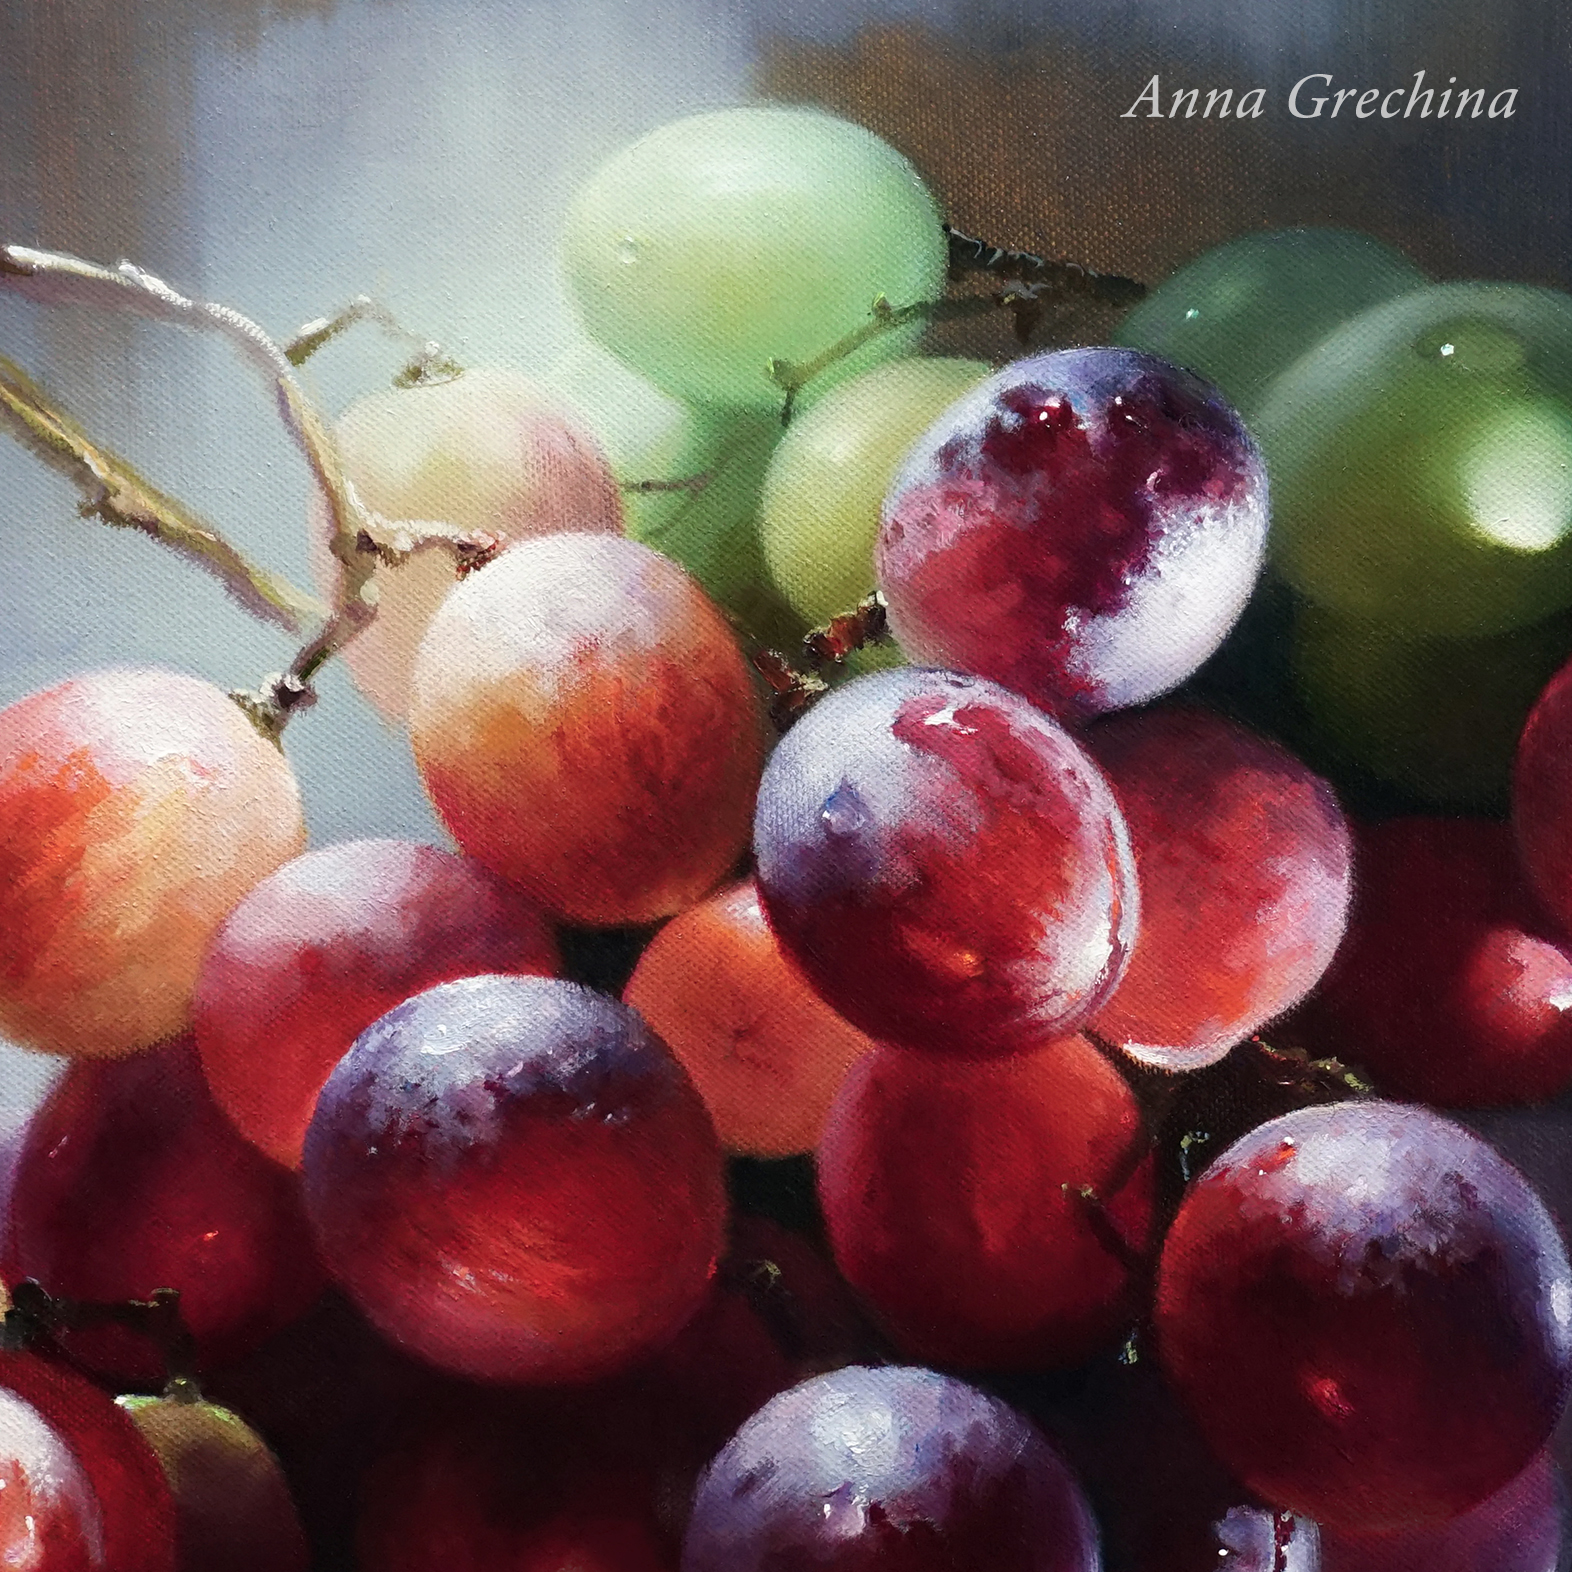 Still life with grapes. Grechina Anna artist. Painting.